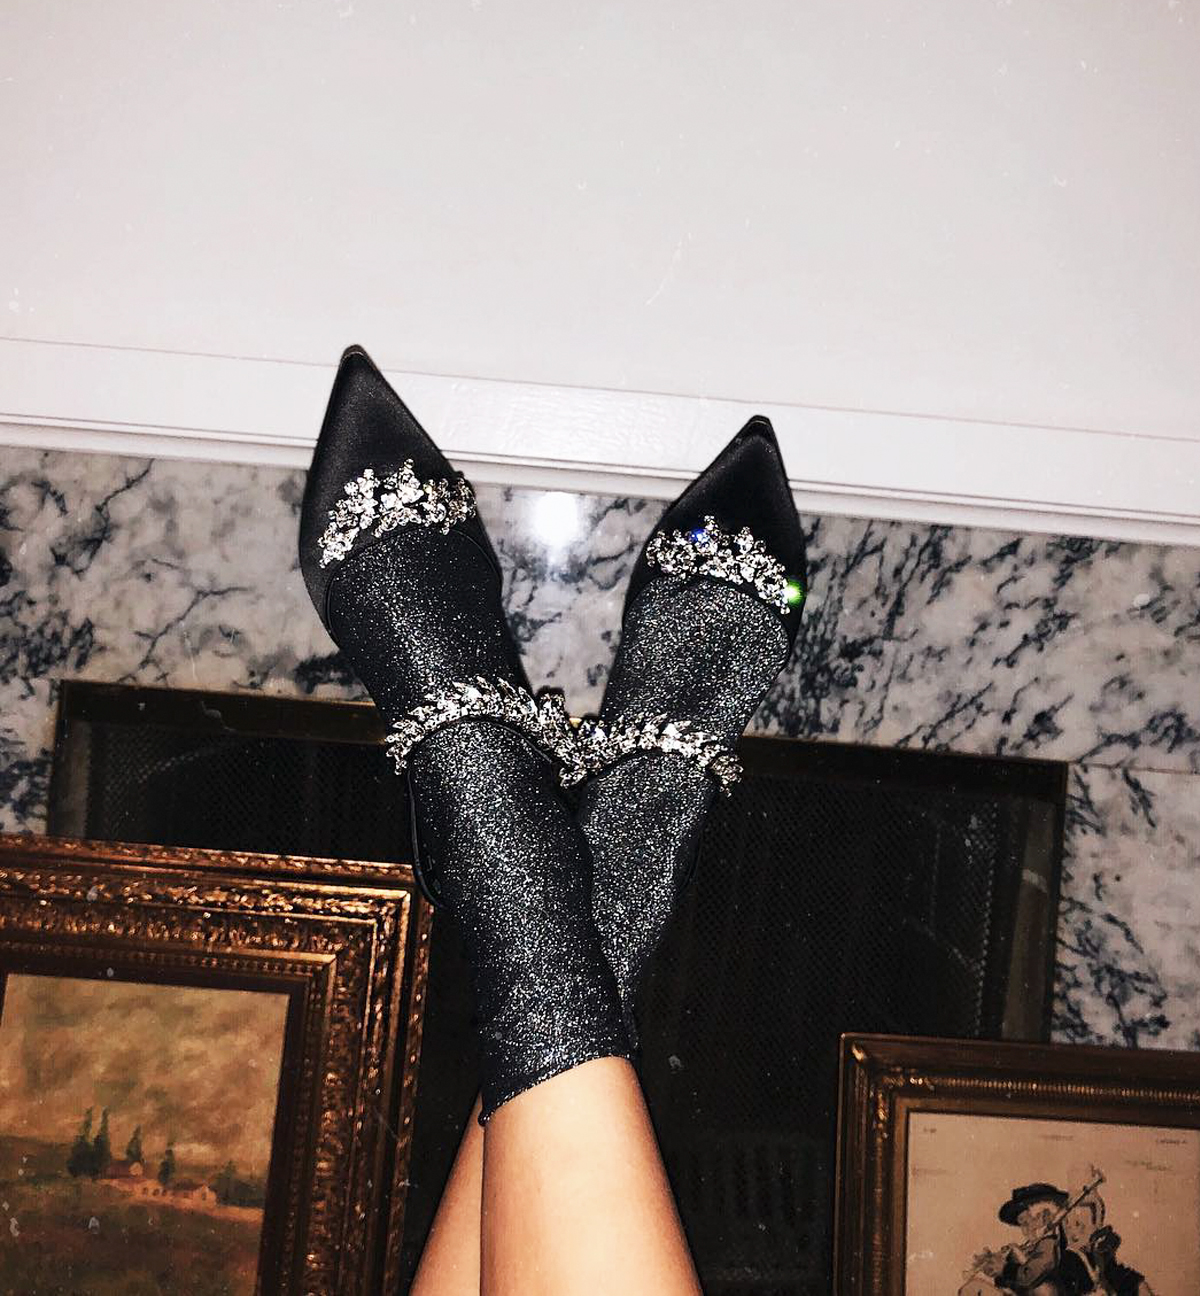 Best Party Shoes: Aimee from Song of Style always gives excellent party feet